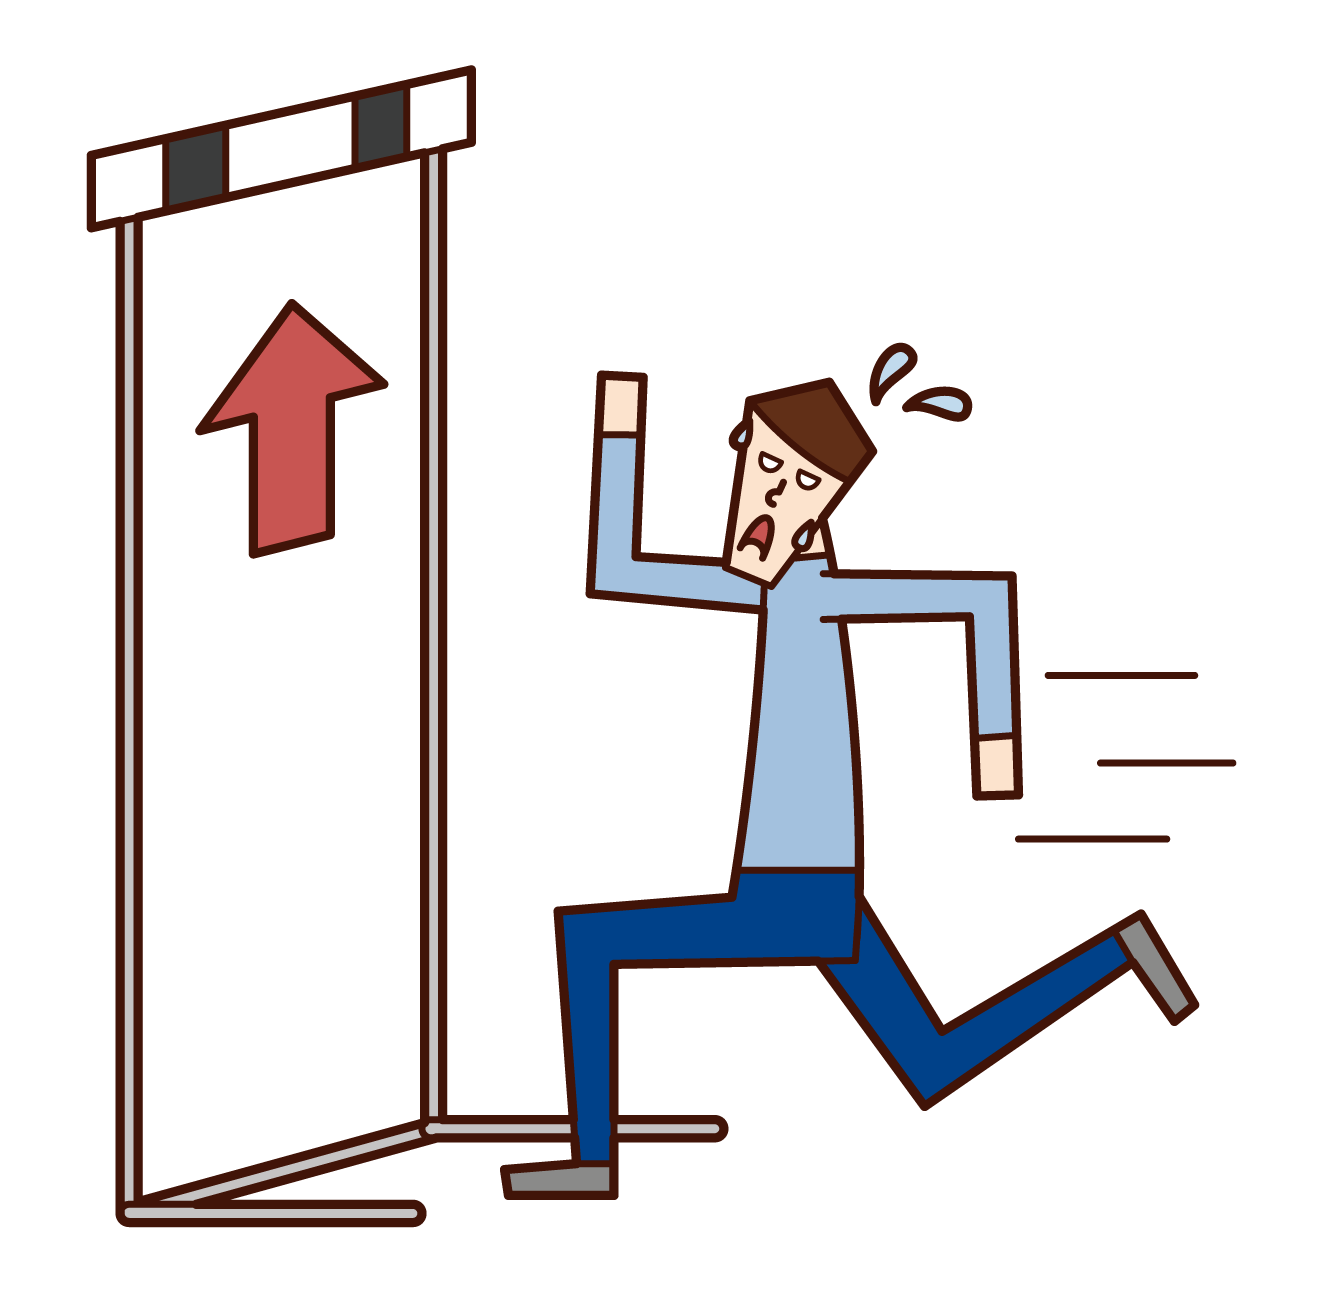 Illustration of a person (male) facing a high hurdle